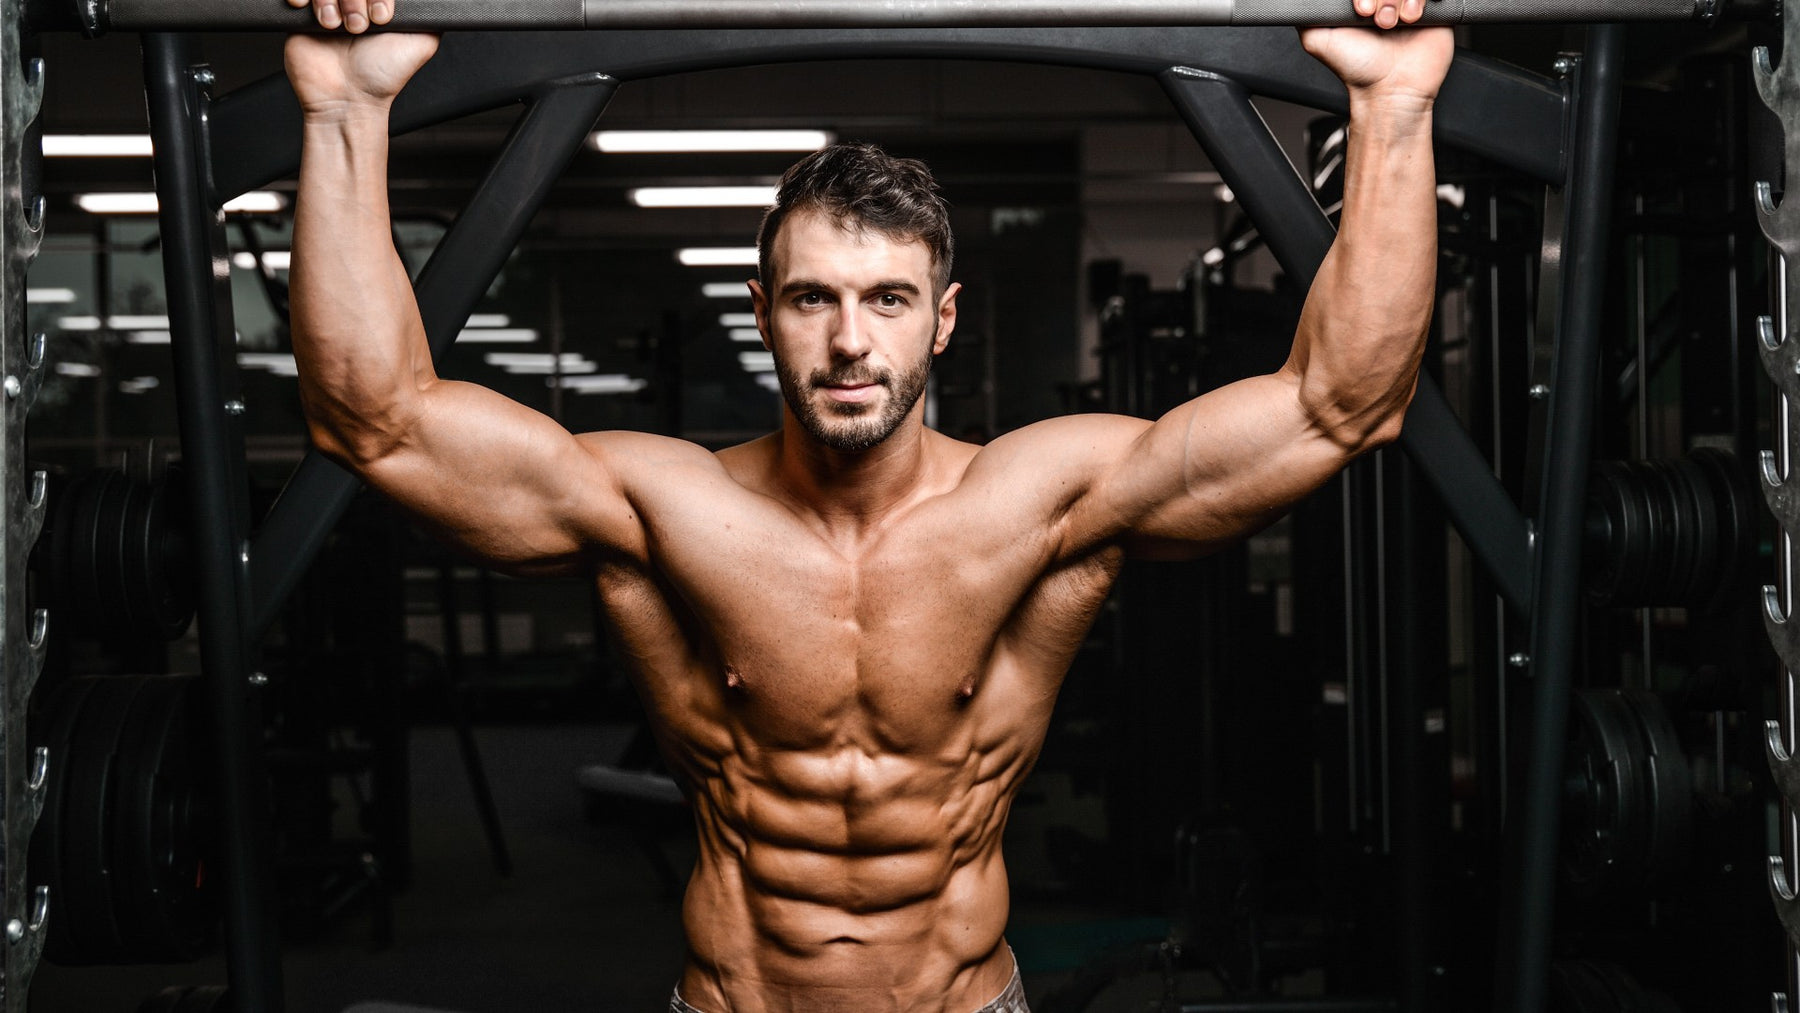 Top 7 Common Bodybuilding Mistakes Made by Beginners